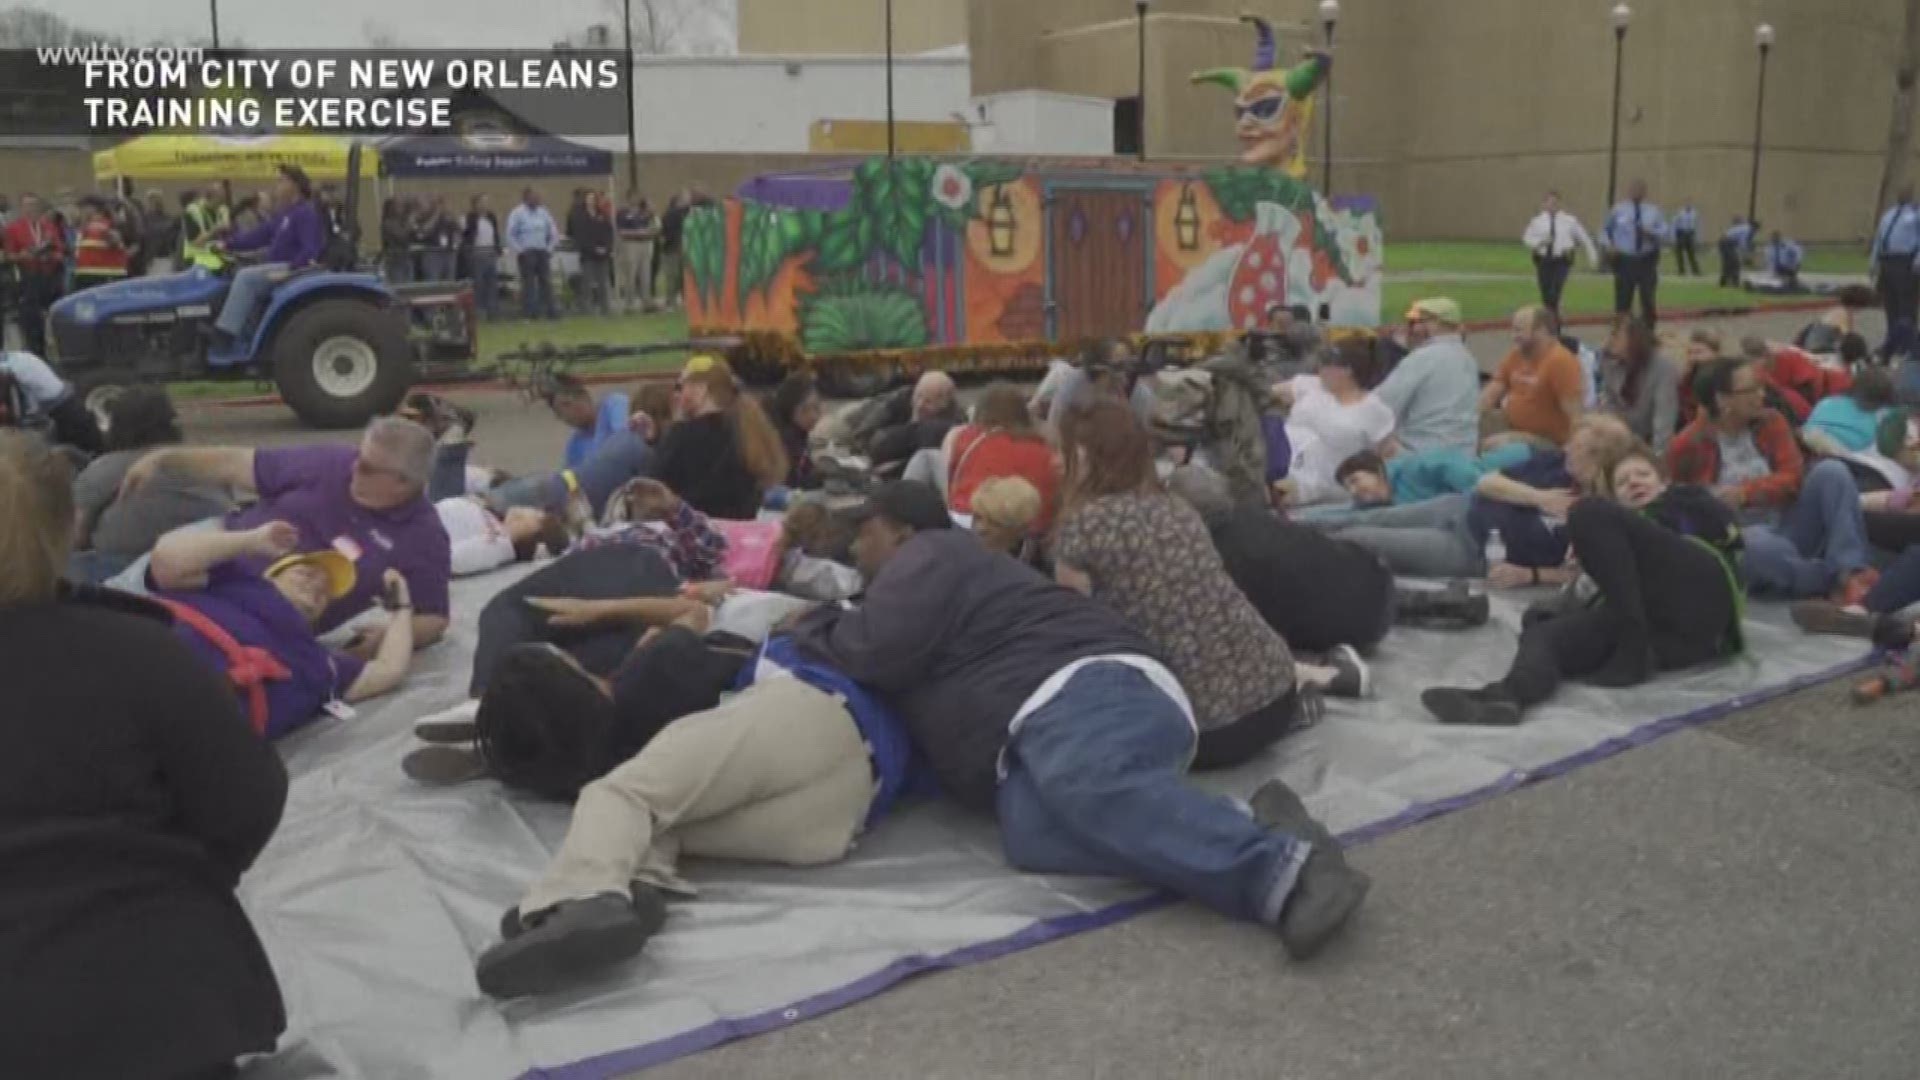 As Carnival kicks into high gear, so are plans to keep everyone safe. On Friday, local, state and federal officials staged a mock terror attack in New Orleans.